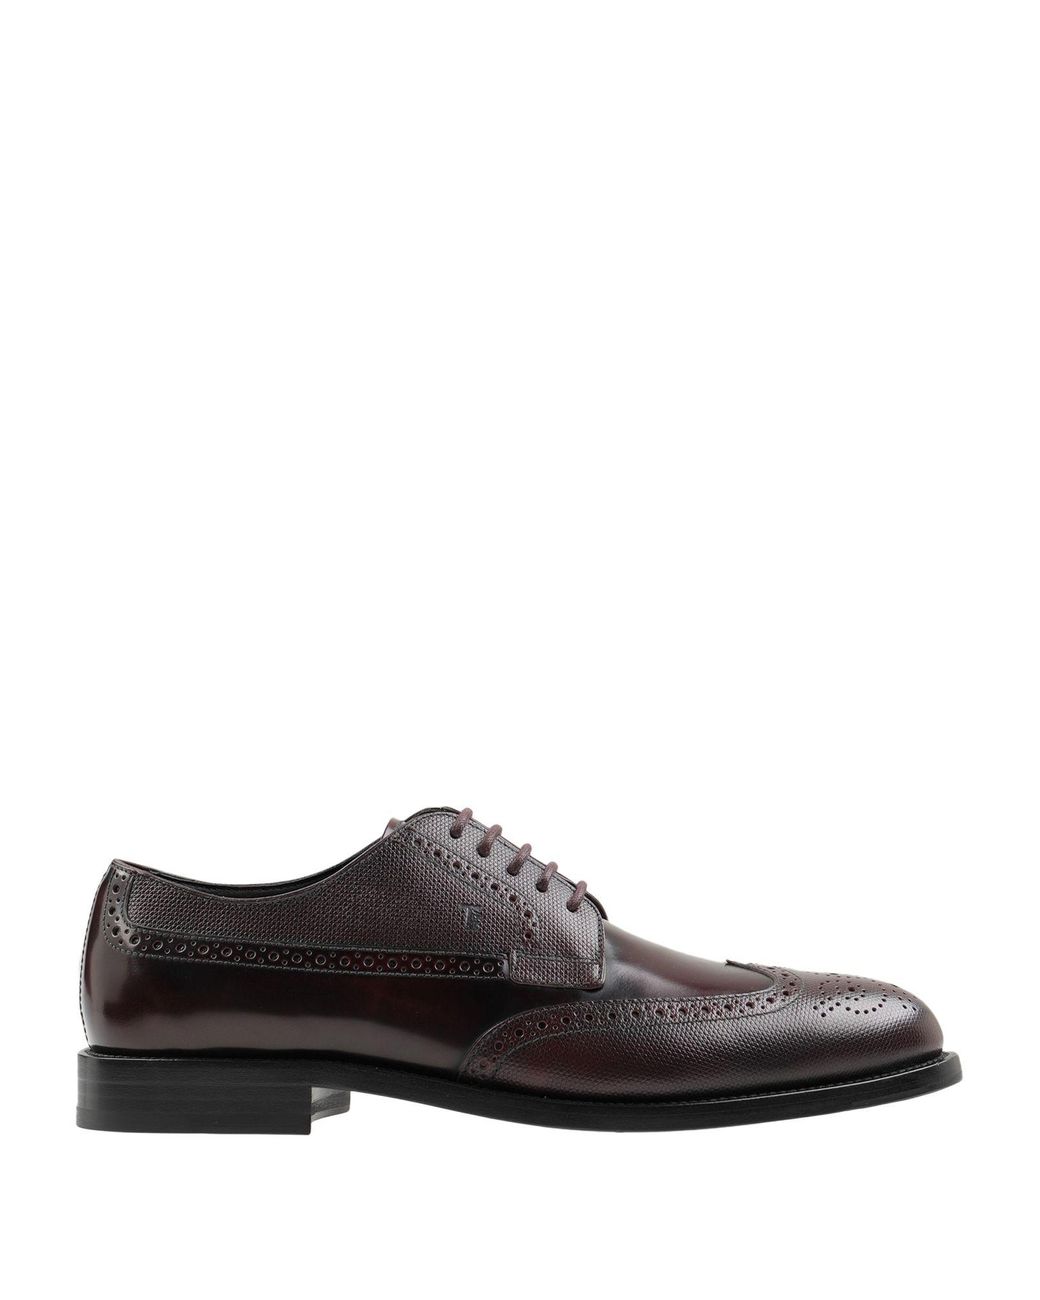 Tod's Leather Lace-up Shoe in Maroon (Brown) for Men - Lyst